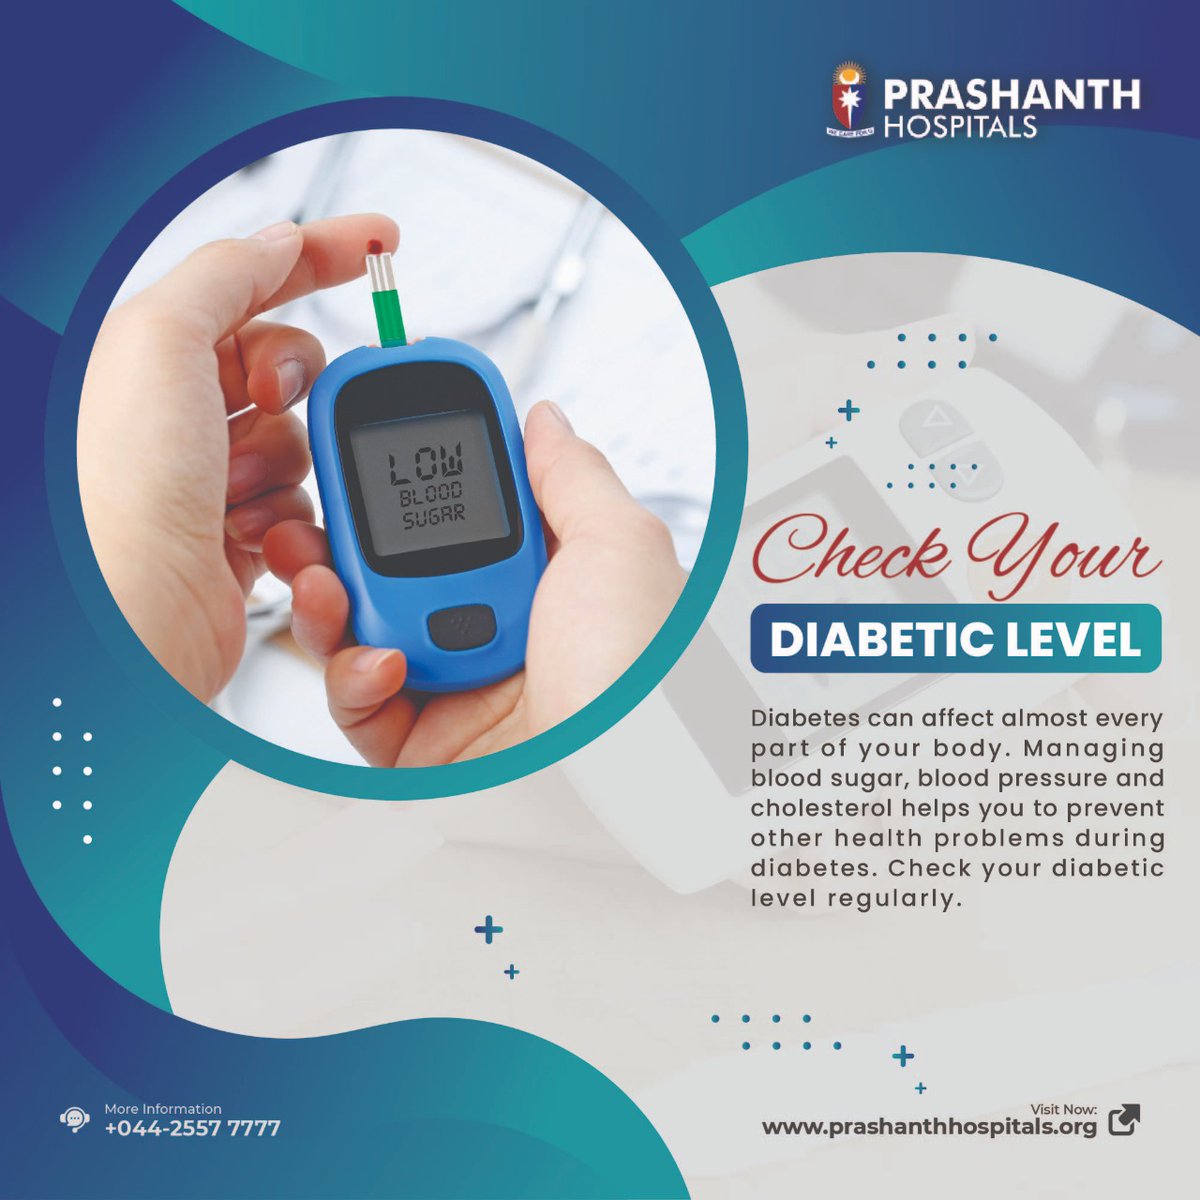 prashanthhospi1: People are advised to check for diabetes are: 

✓ Anyone w...